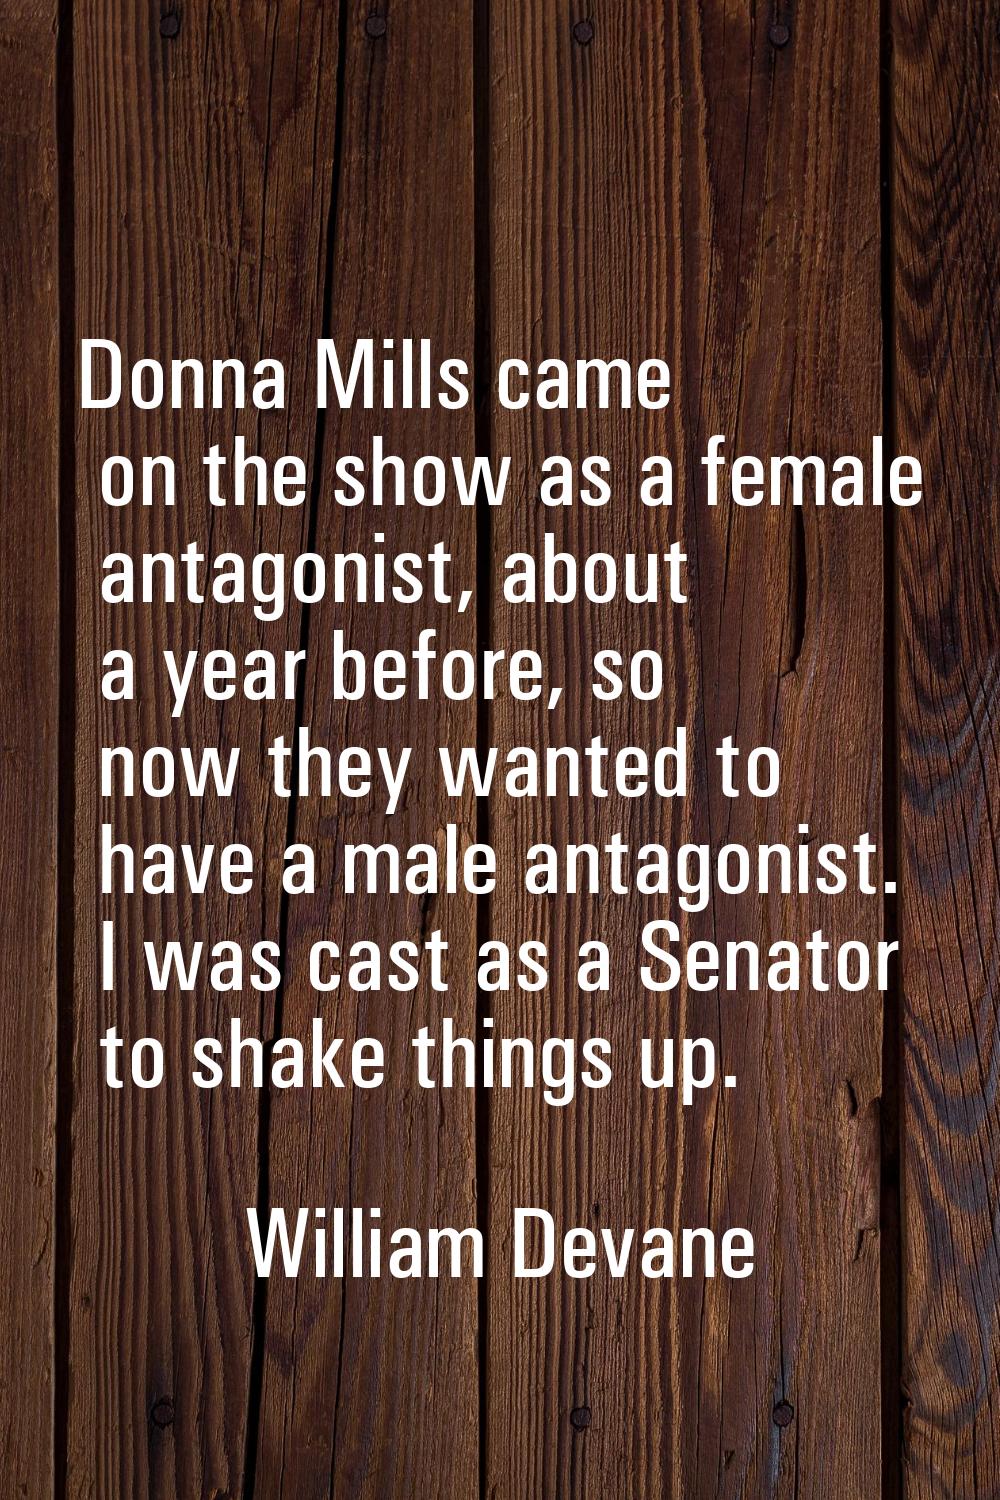 Donna Mills came on the show as a female antagonist, about a year before, so now they wanted to hav